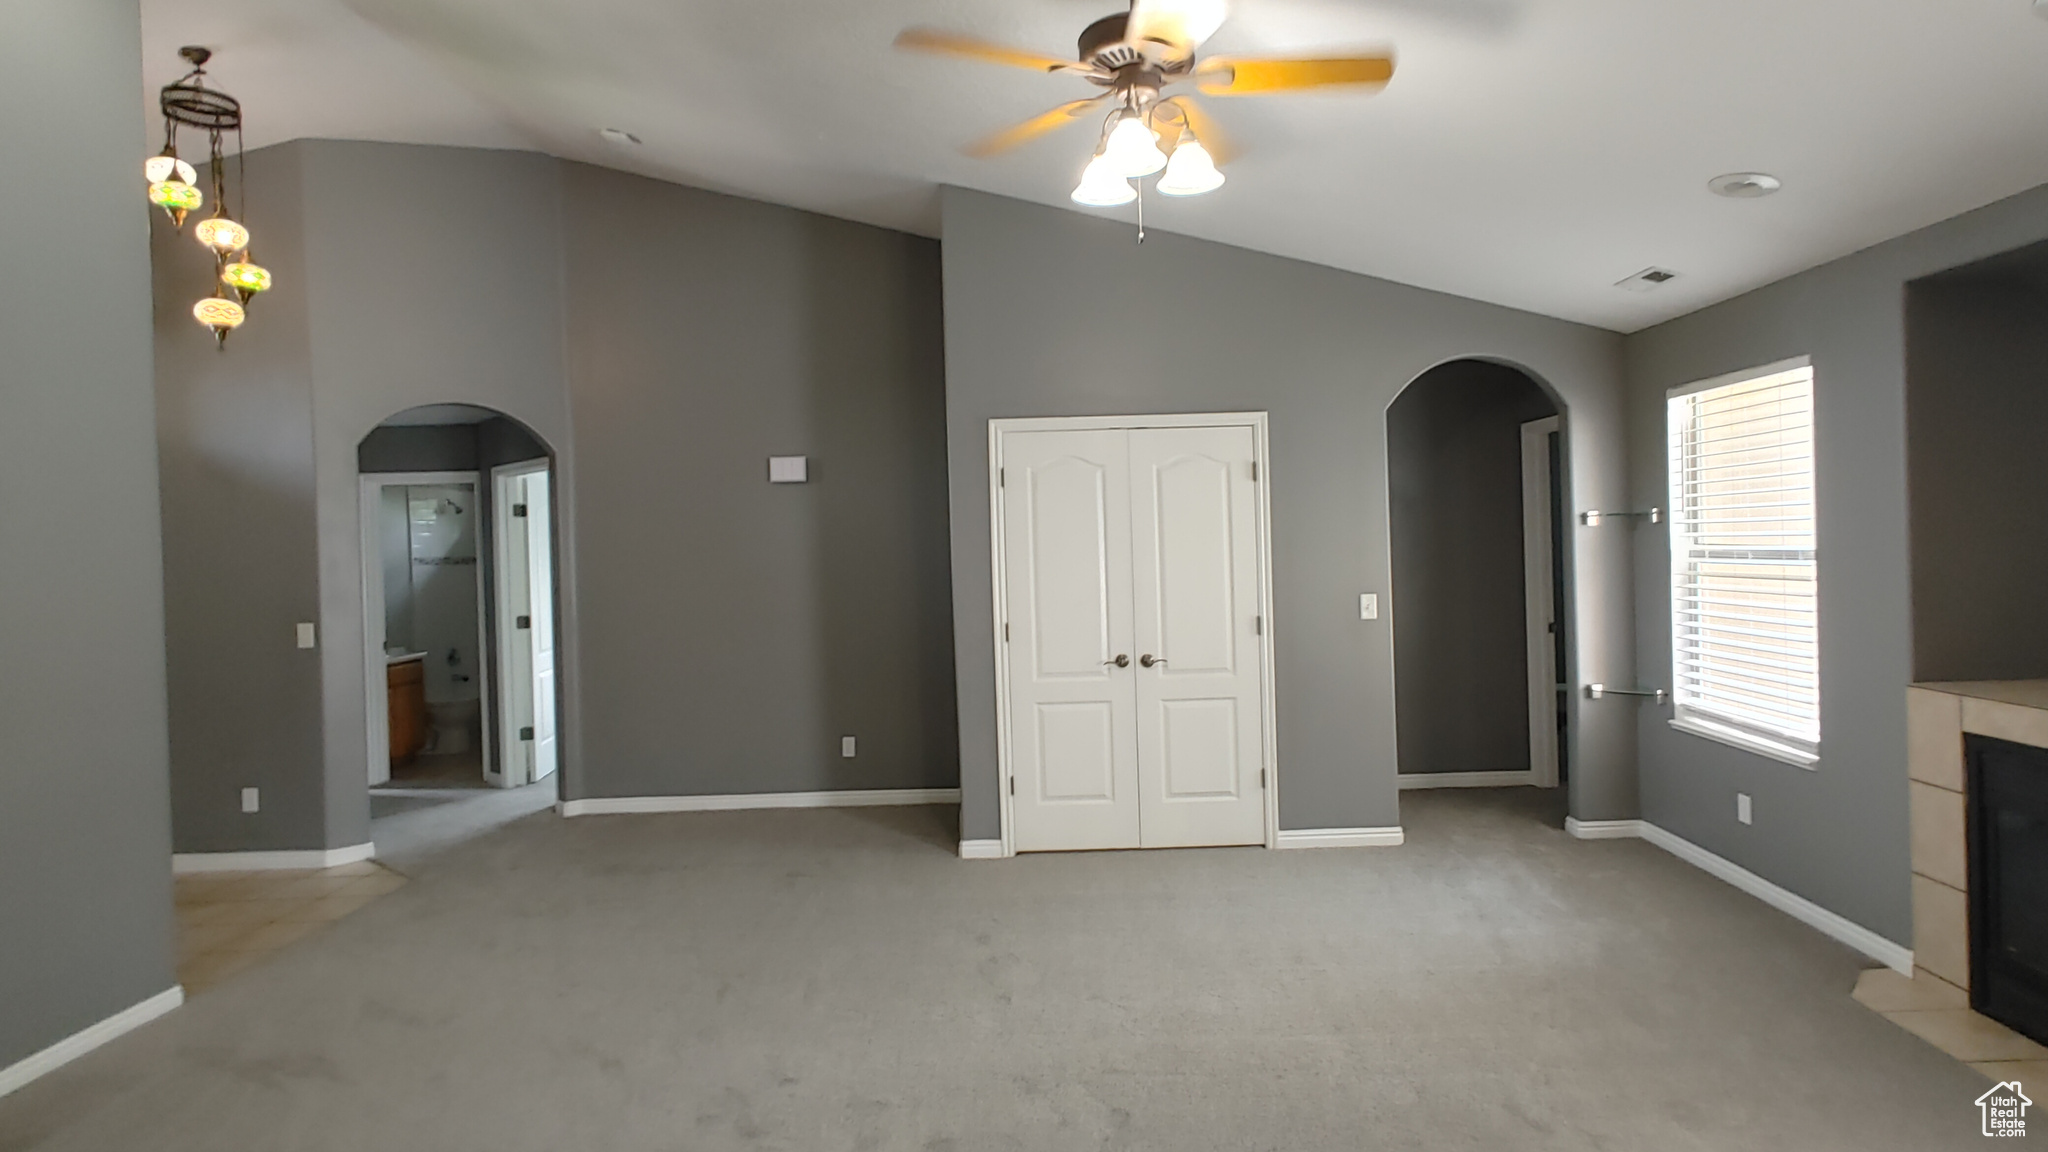 Unfurnished living room with ceiling fan, vaulted ceiling, and carpet flooring